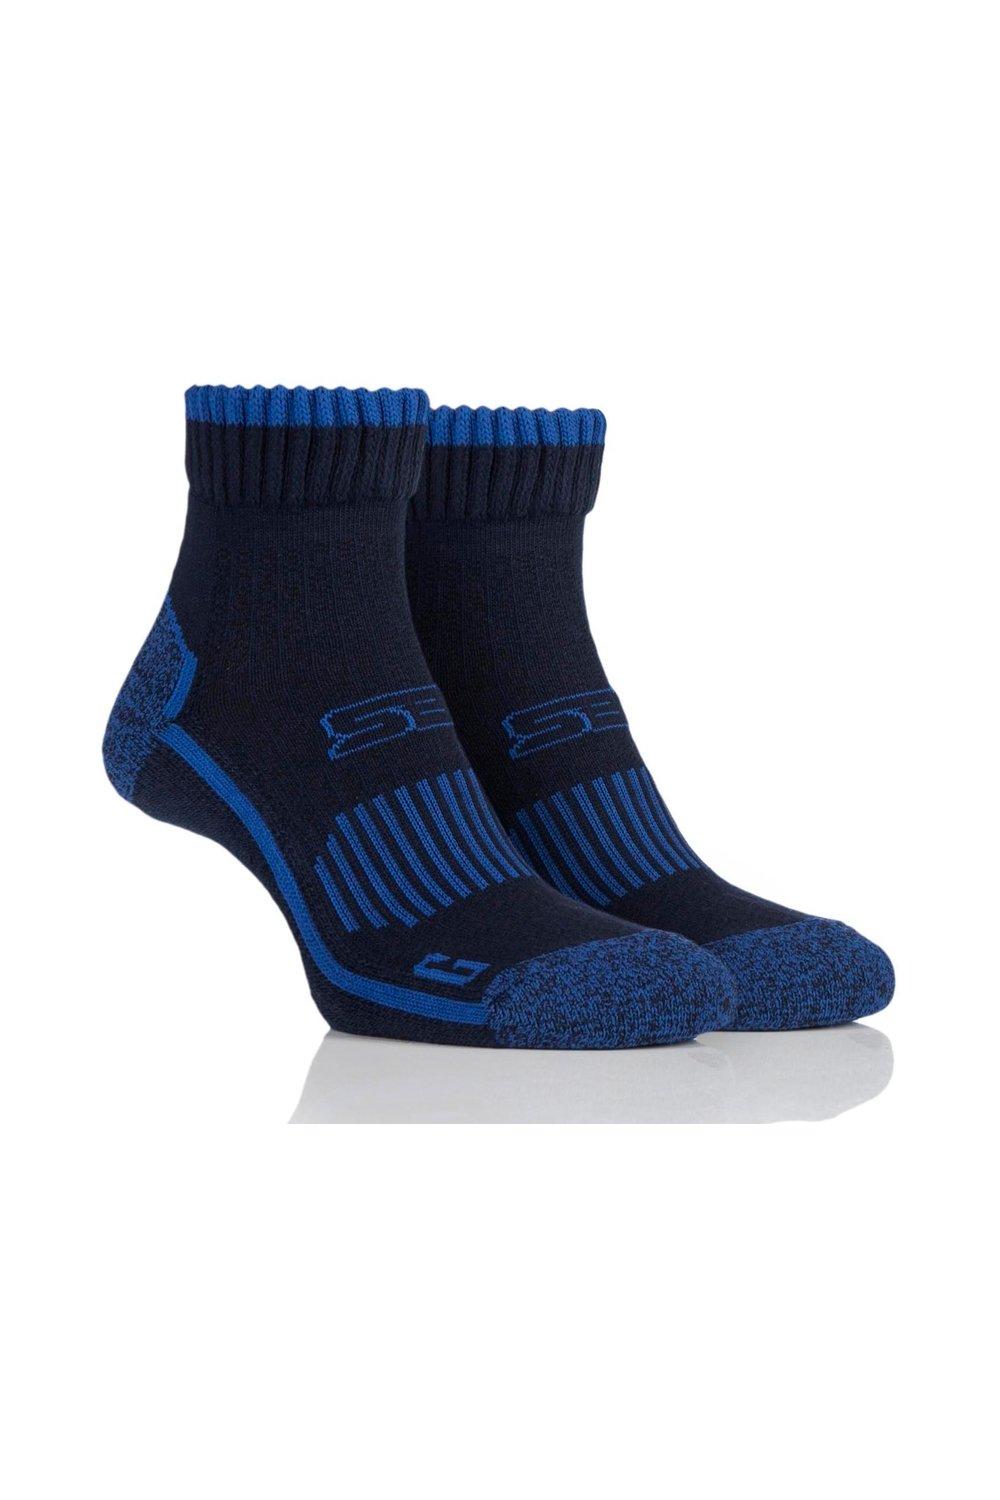 2 Pair with BlueGuard Ankle High Walking Socks